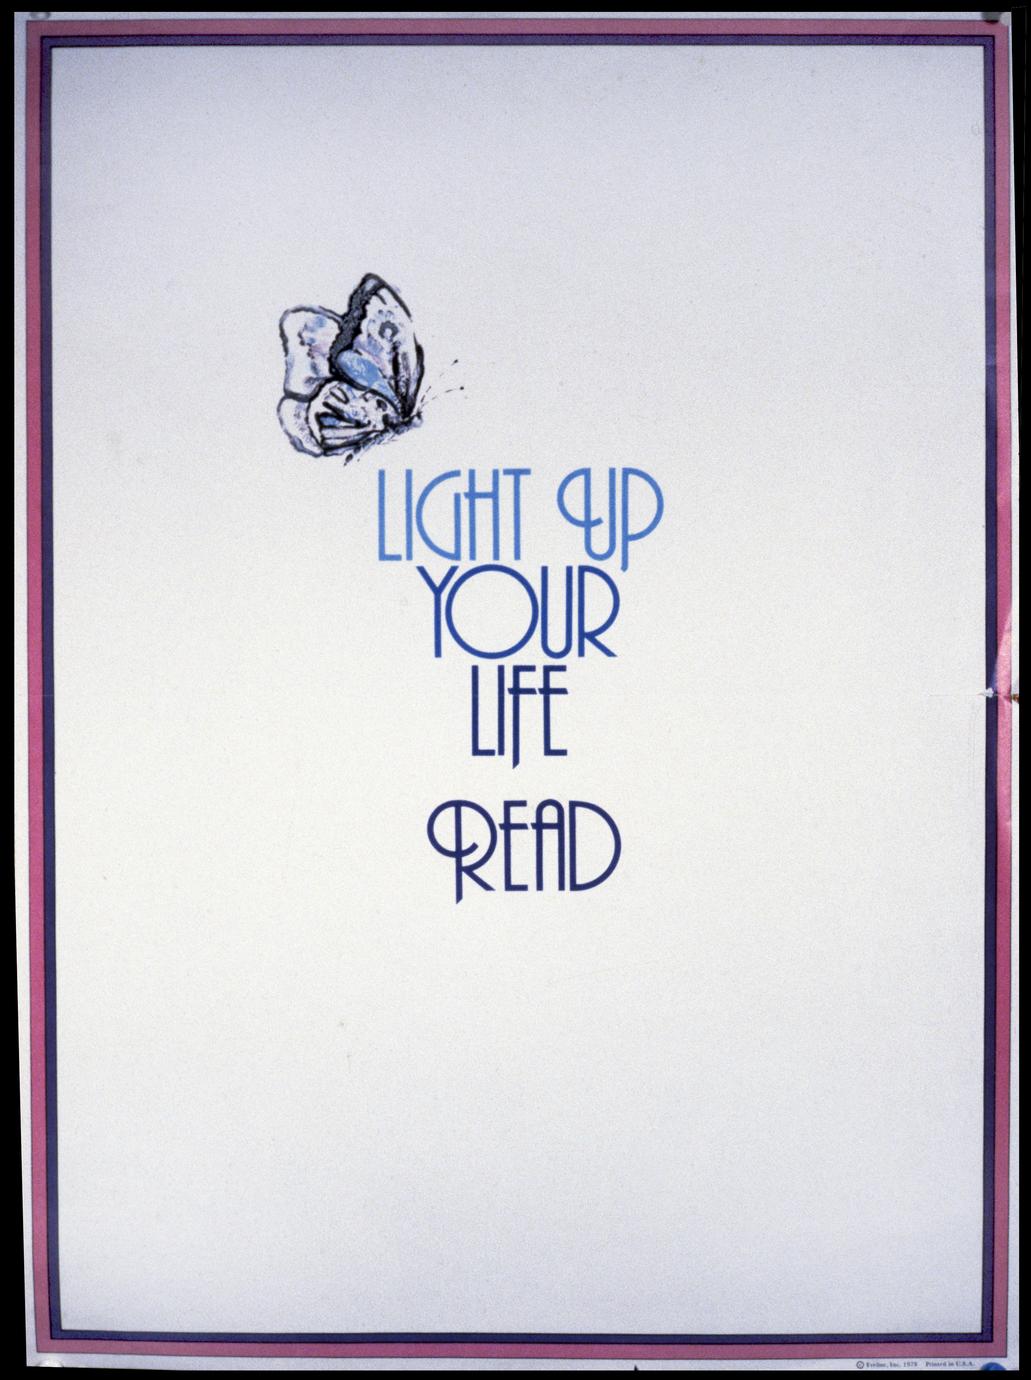 Light up your life : read